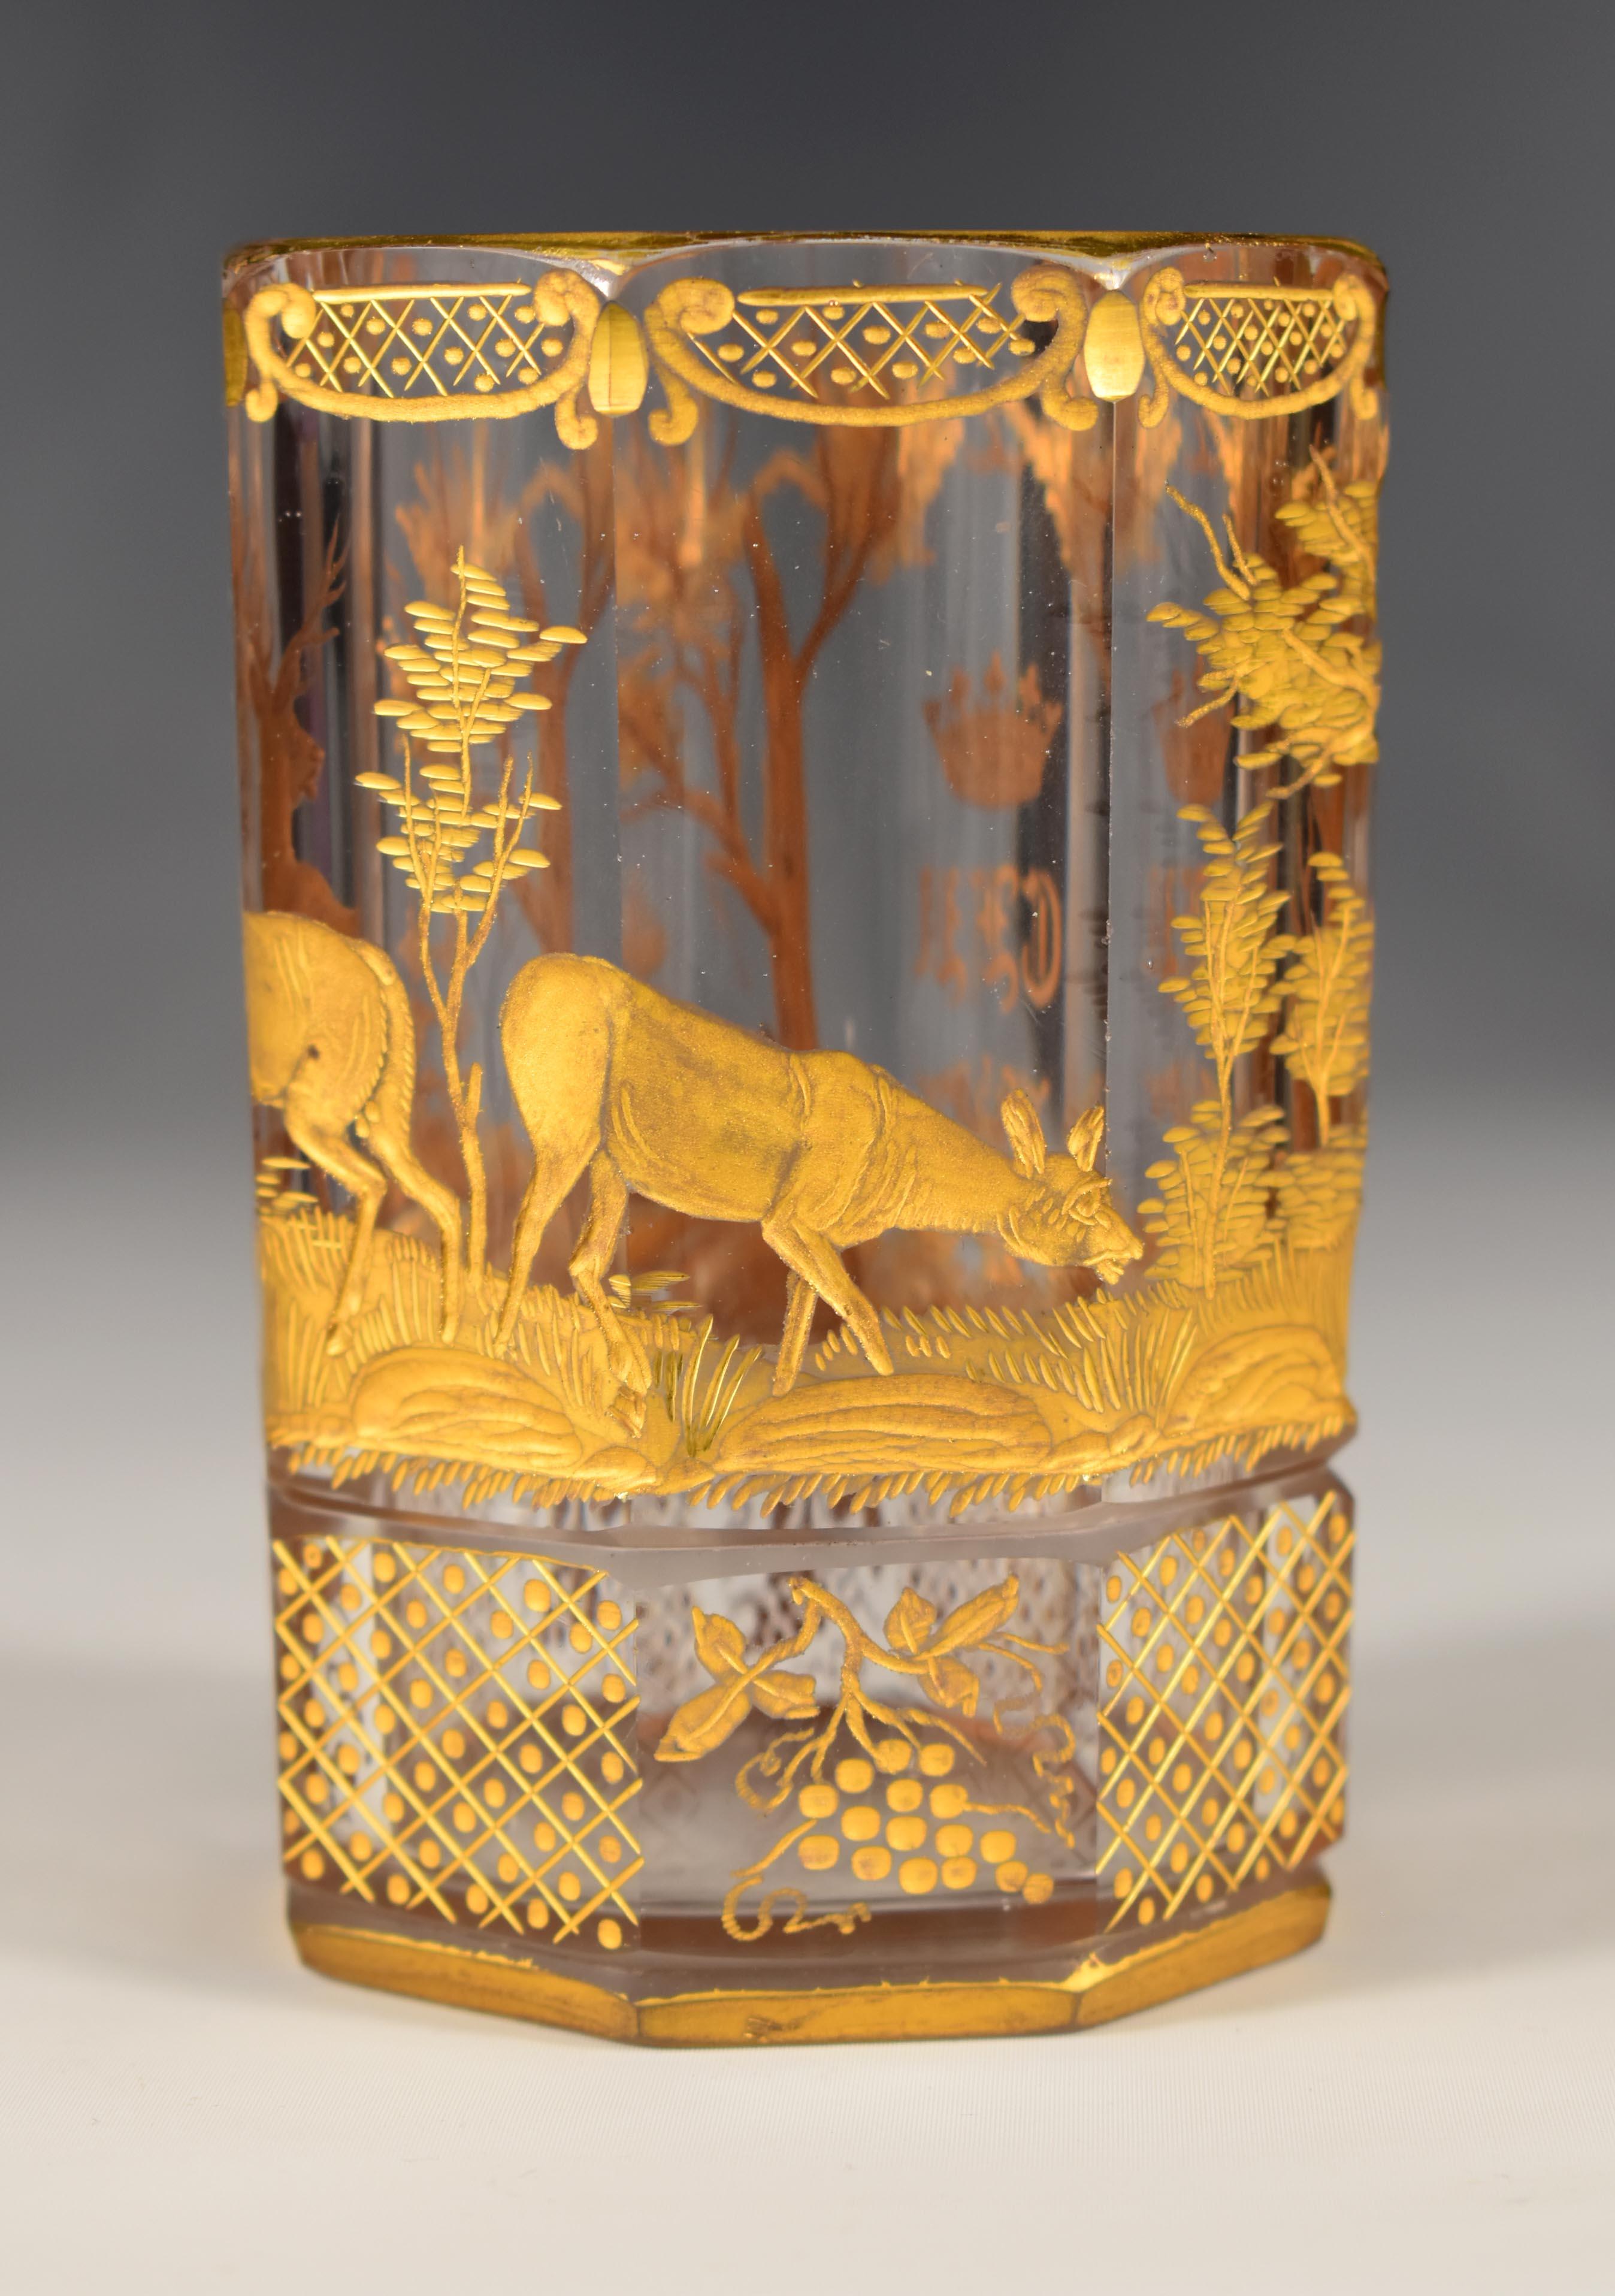 Gilded Vase + Two Gilded Glasses - Hunting motif. 20th century For Sale 7